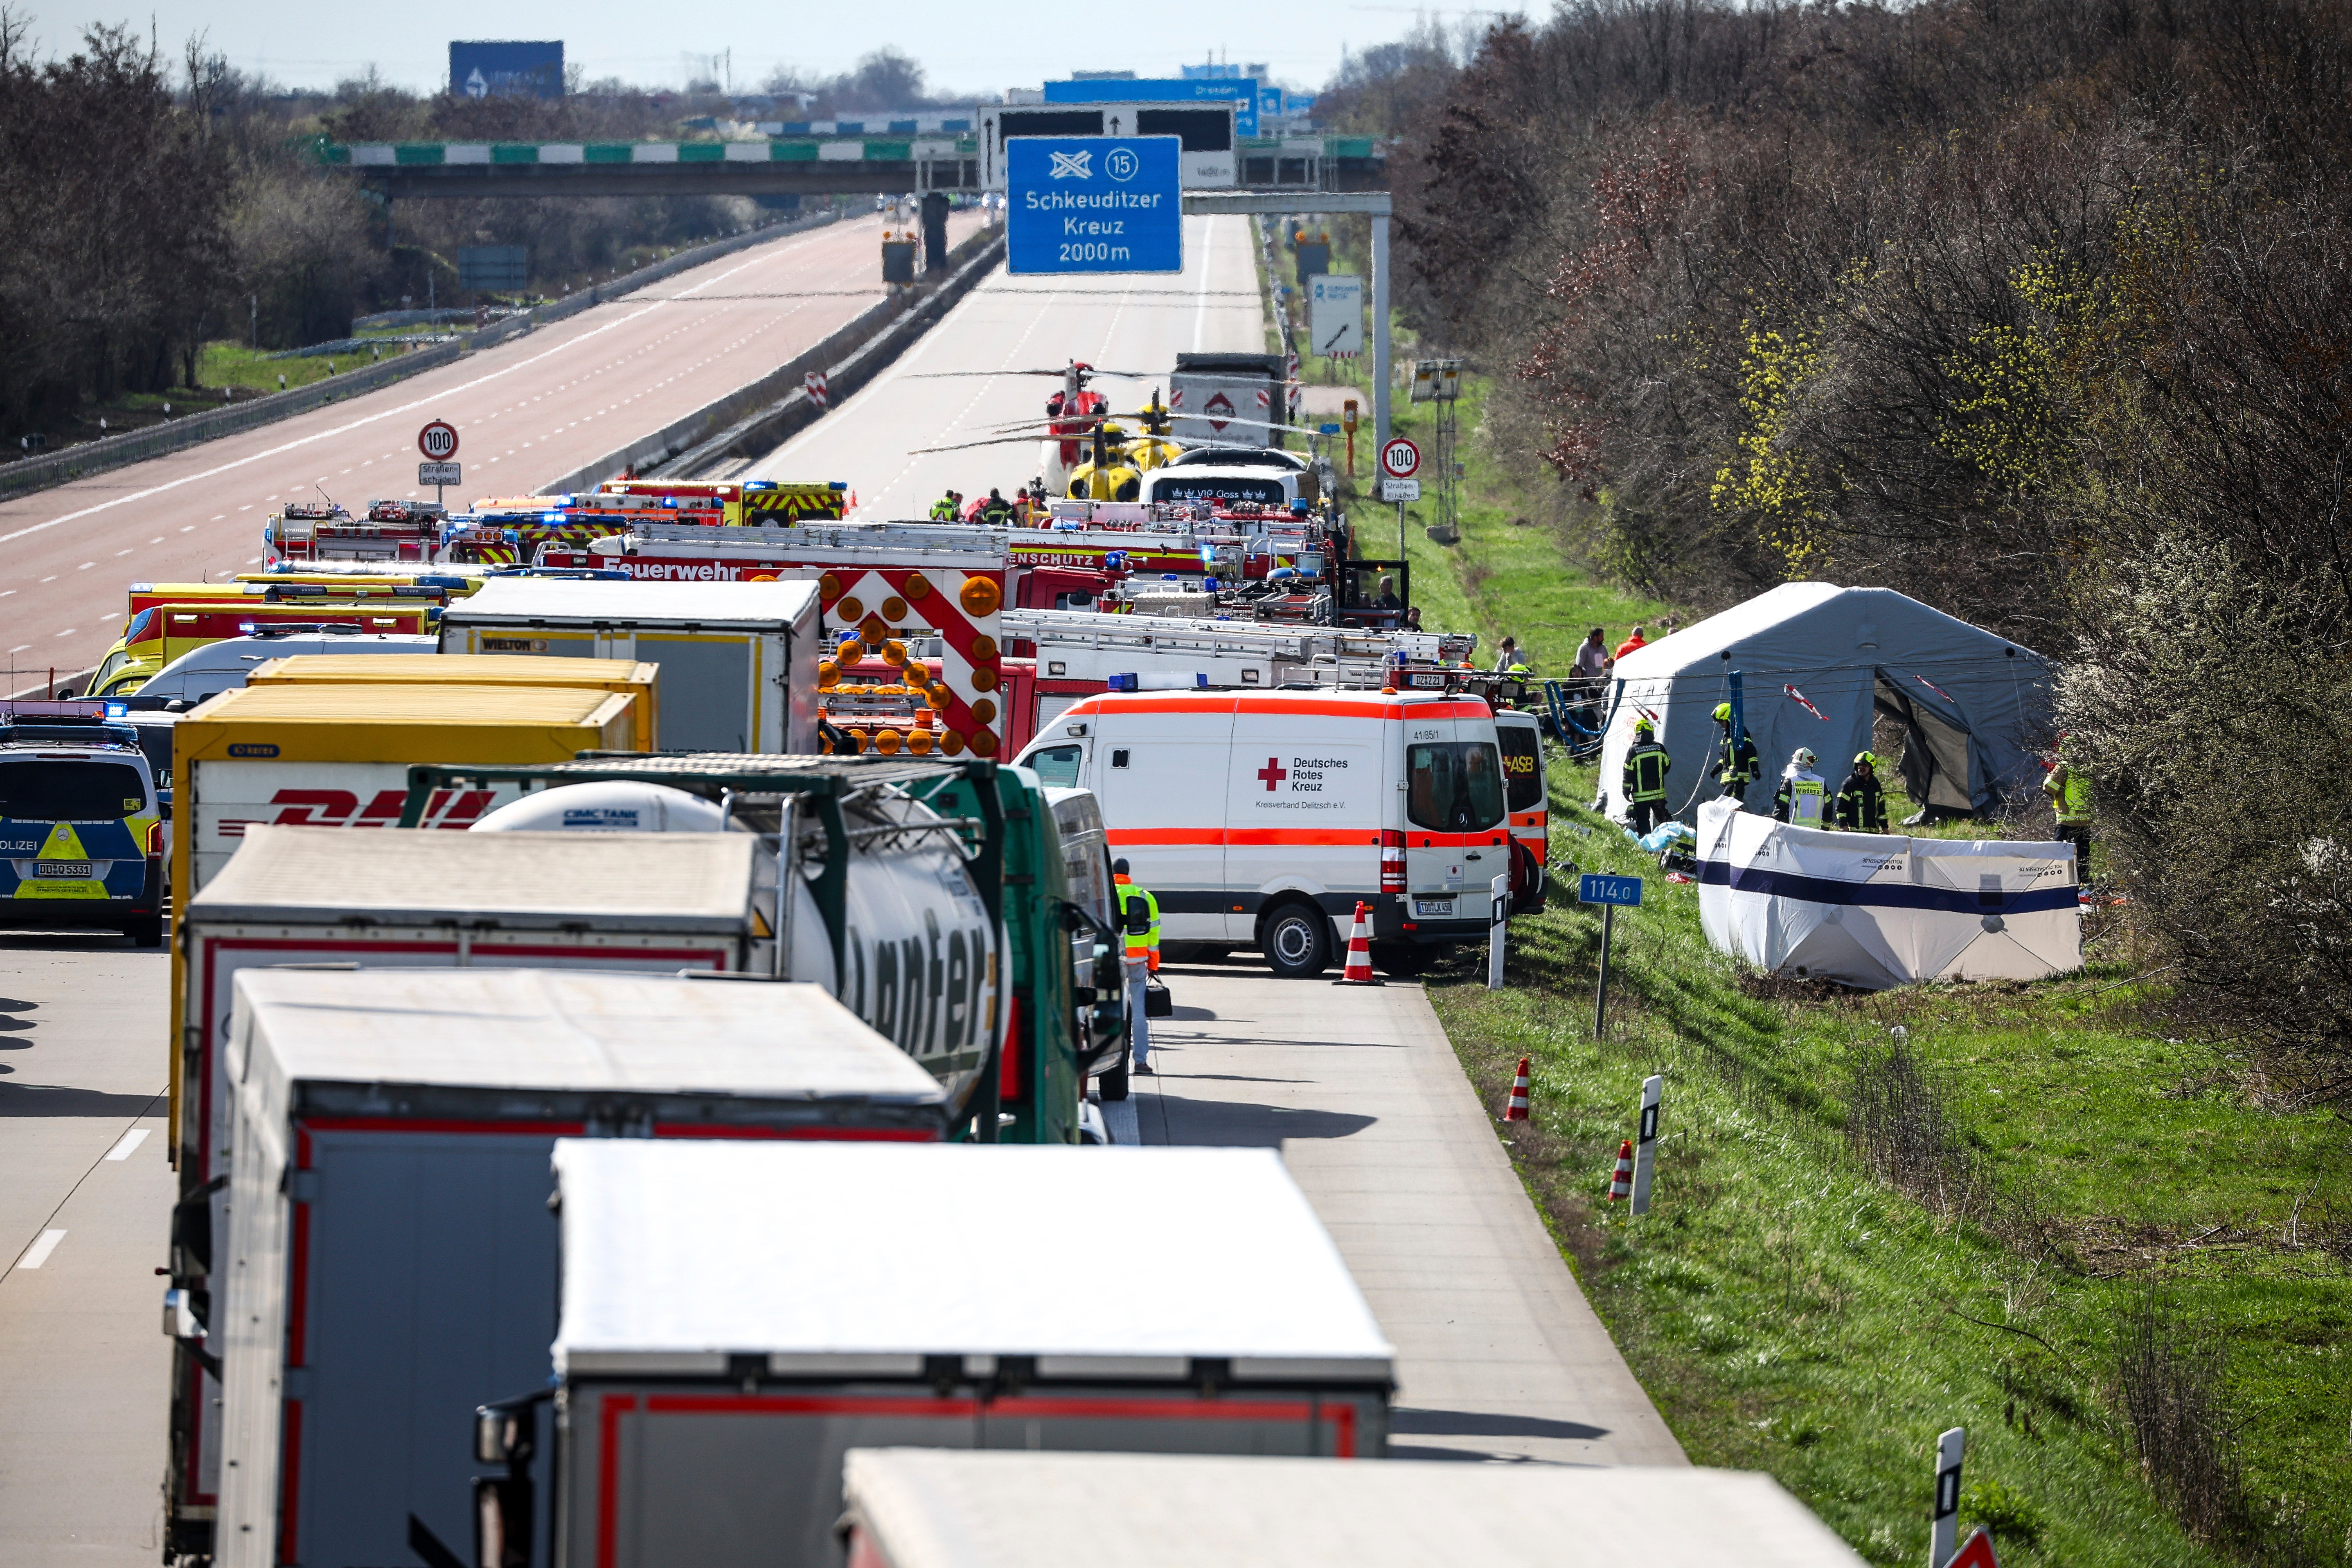 Emergency vehicles and rescue helicopters are at the scene of the accident on the A9, near Schkeuditz, Germany